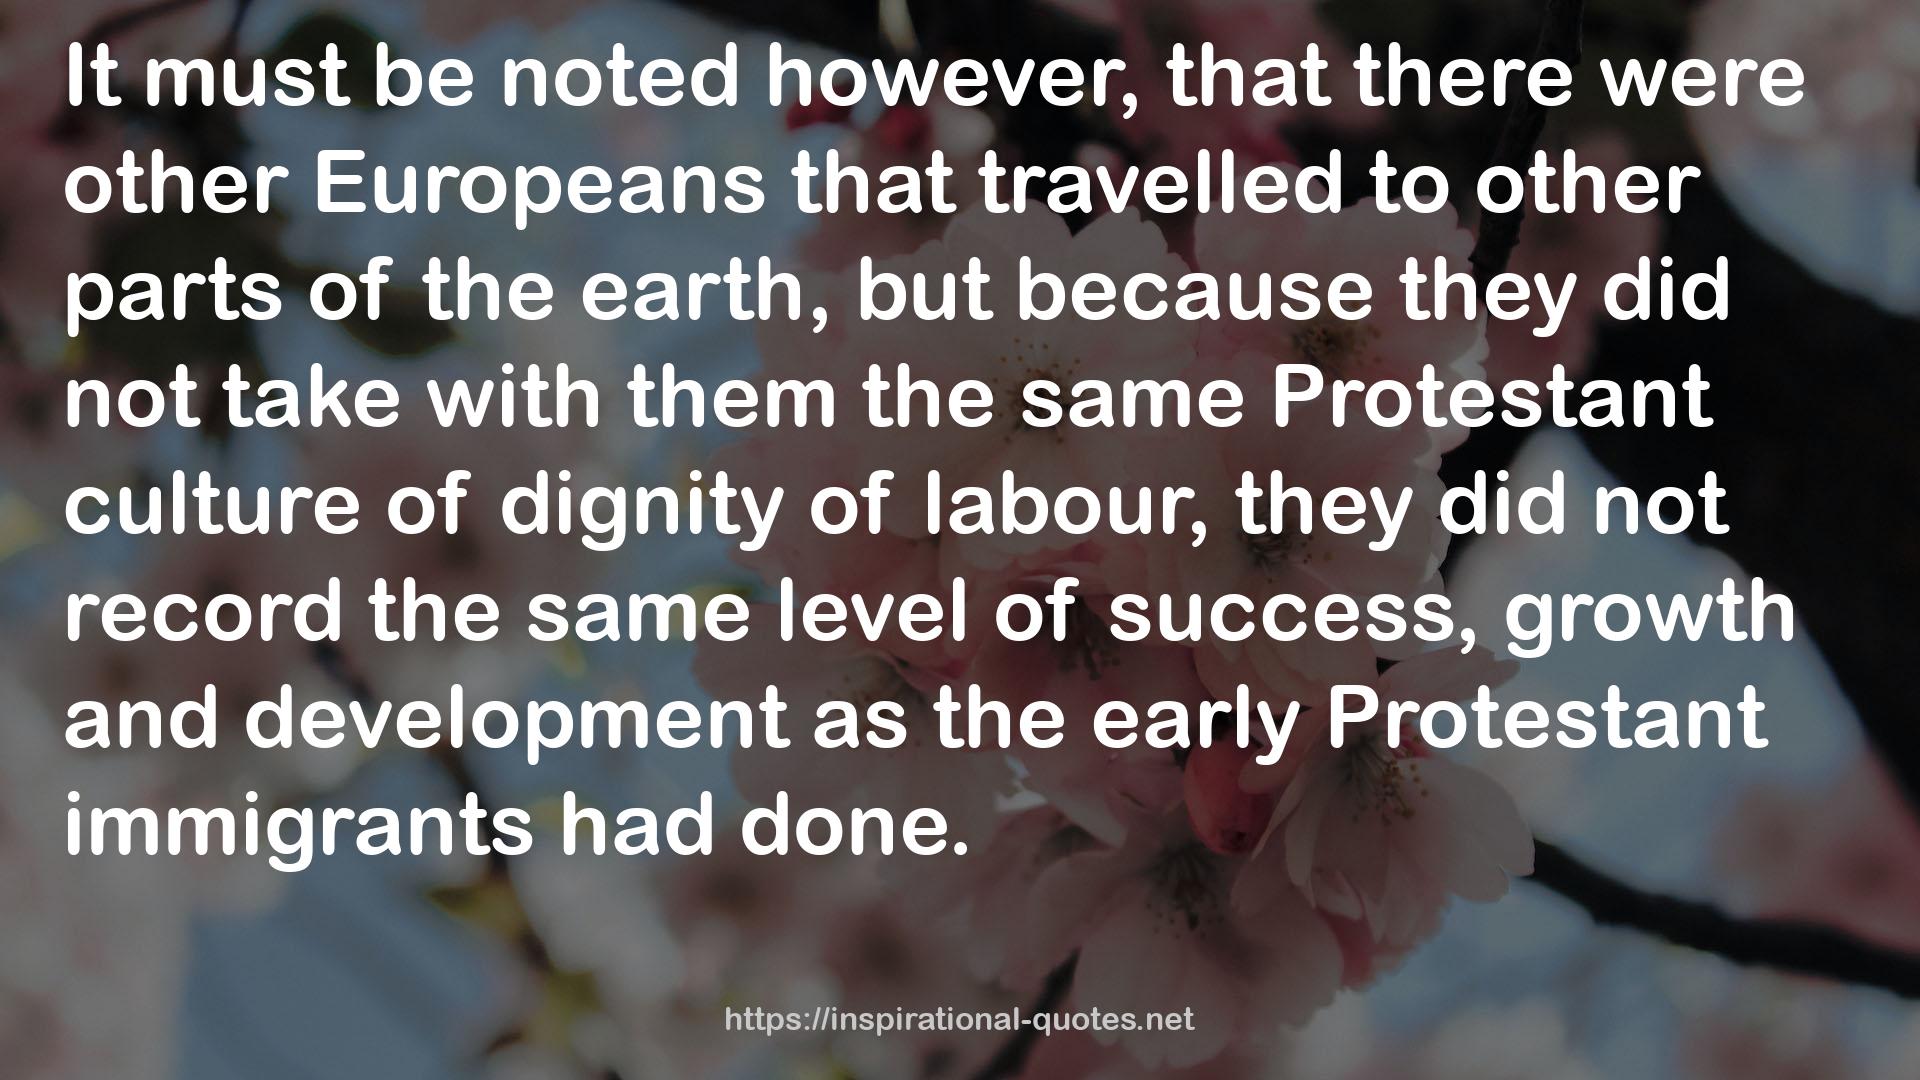 the early Protestant immigrants  QUOTES